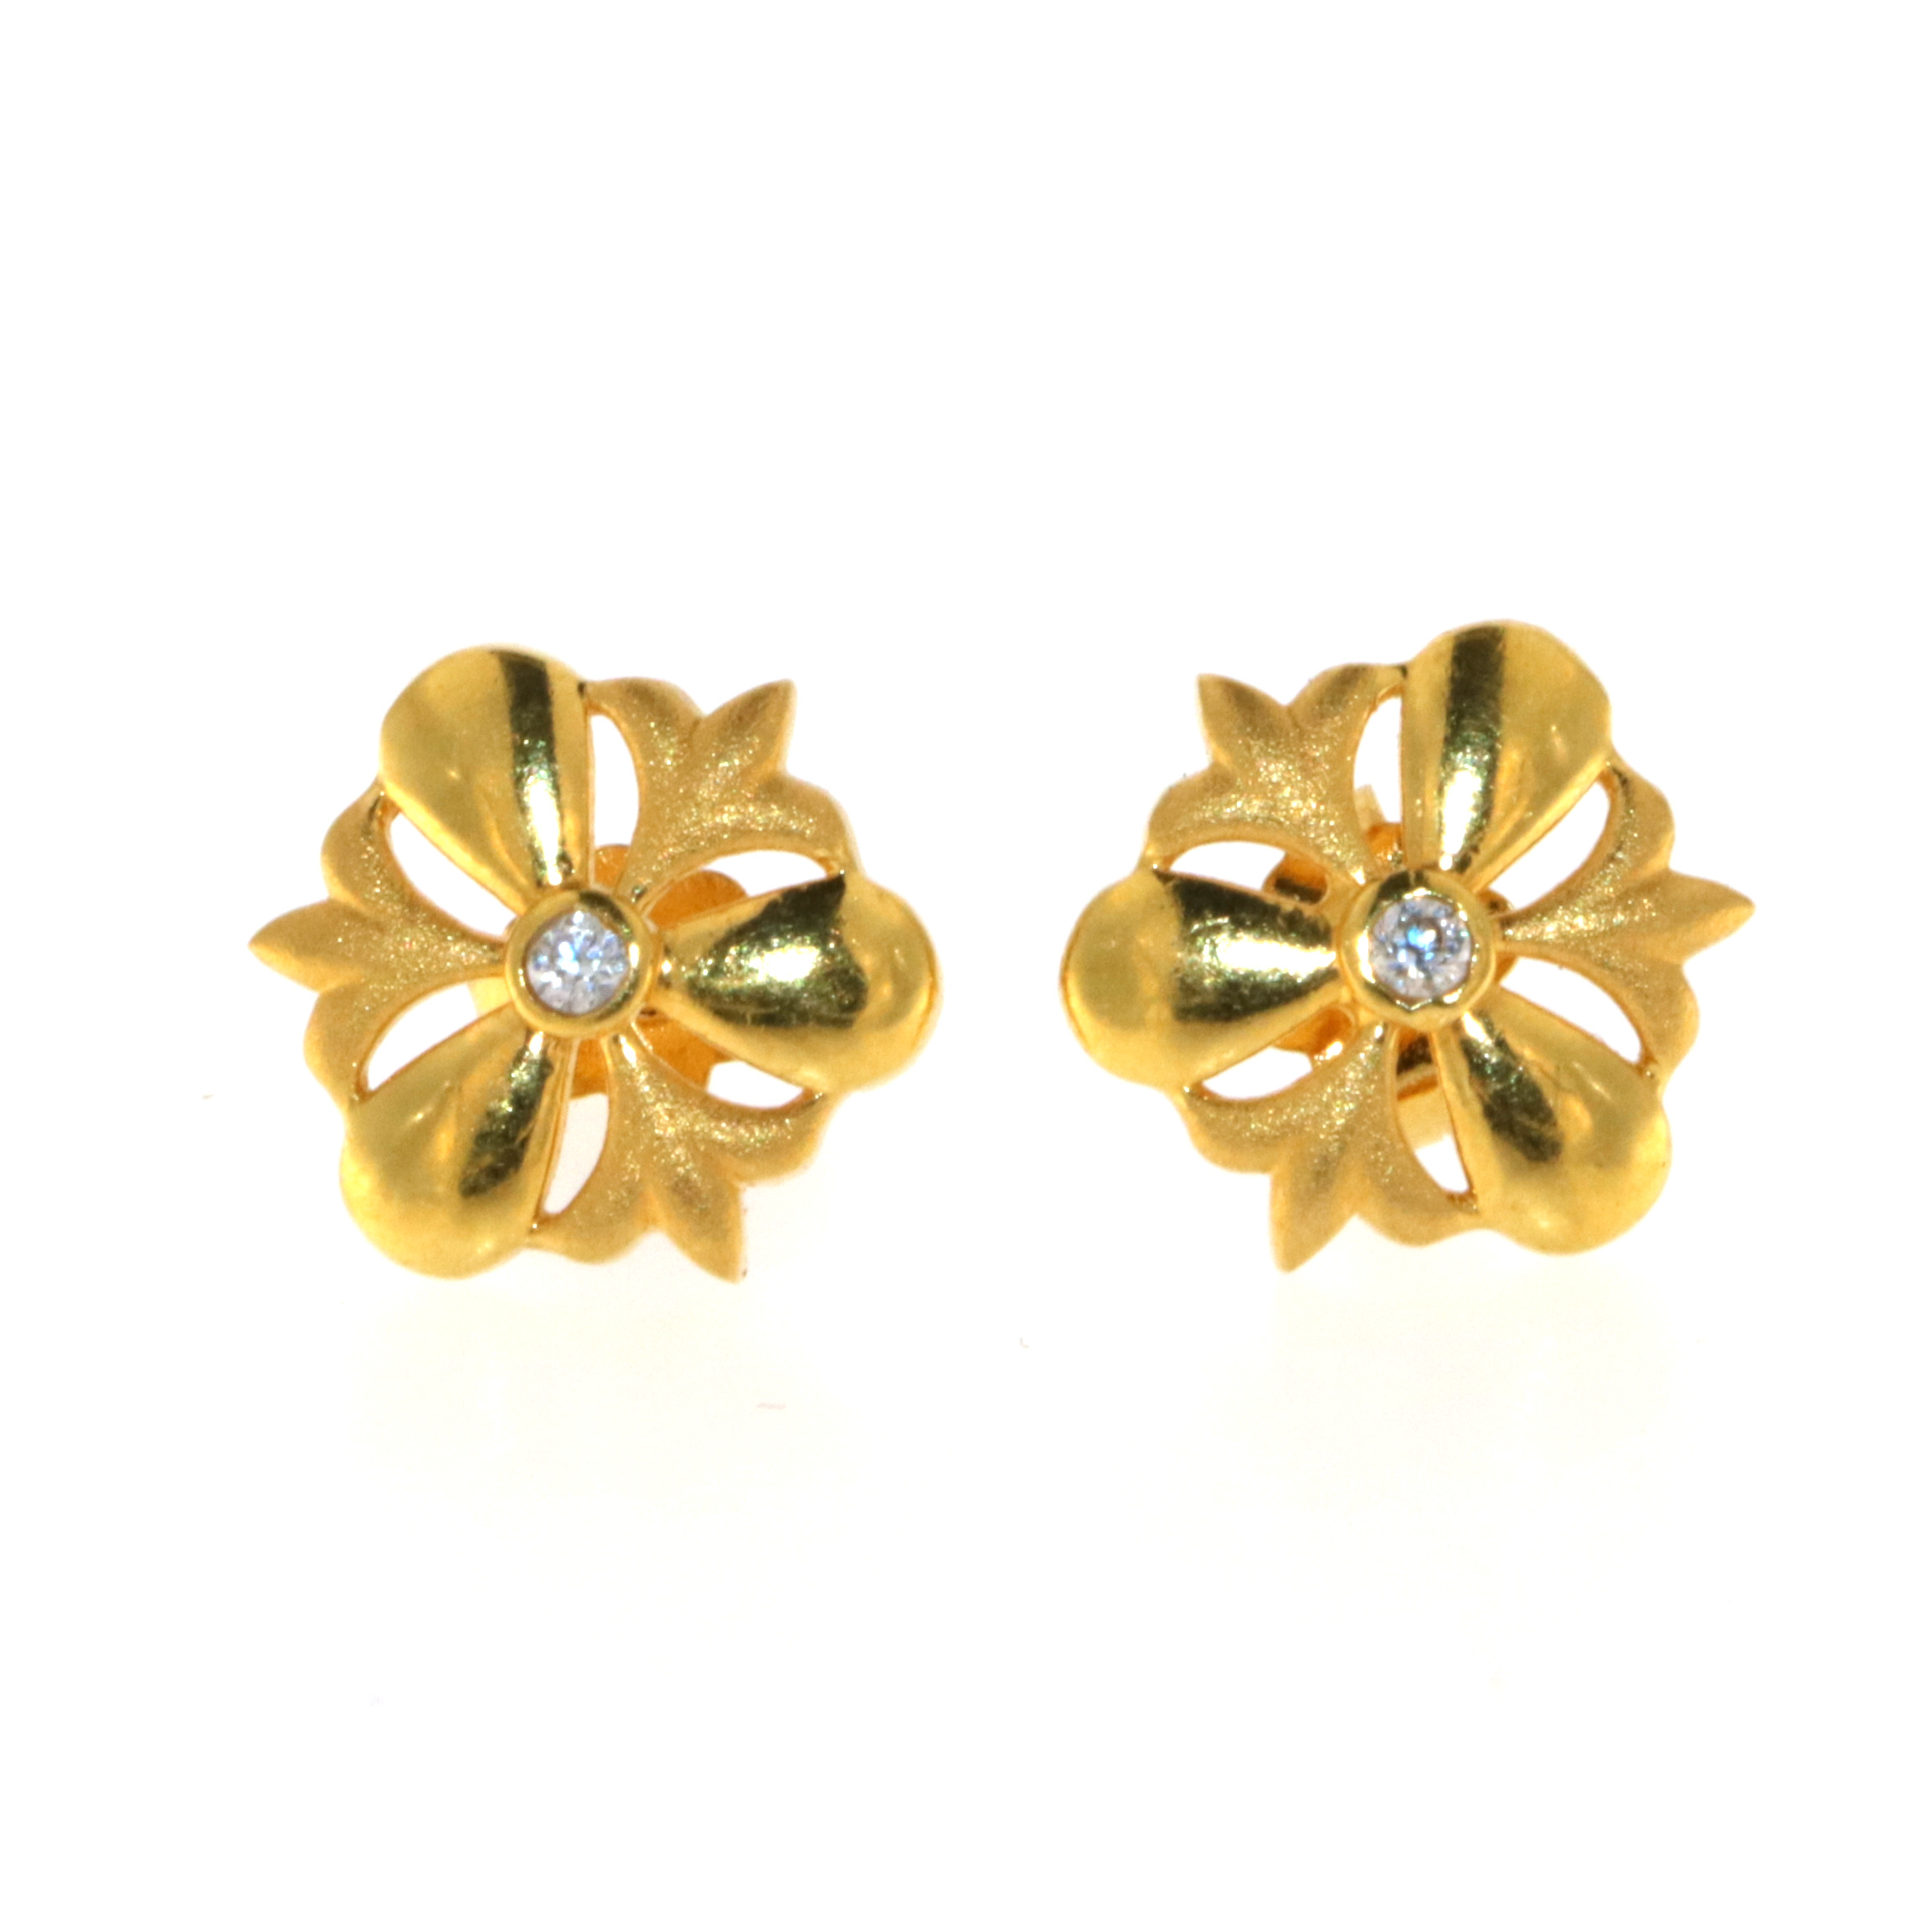 22ct Real Gold Asian/Indian/Pakistani Style Stud Flower Earrings